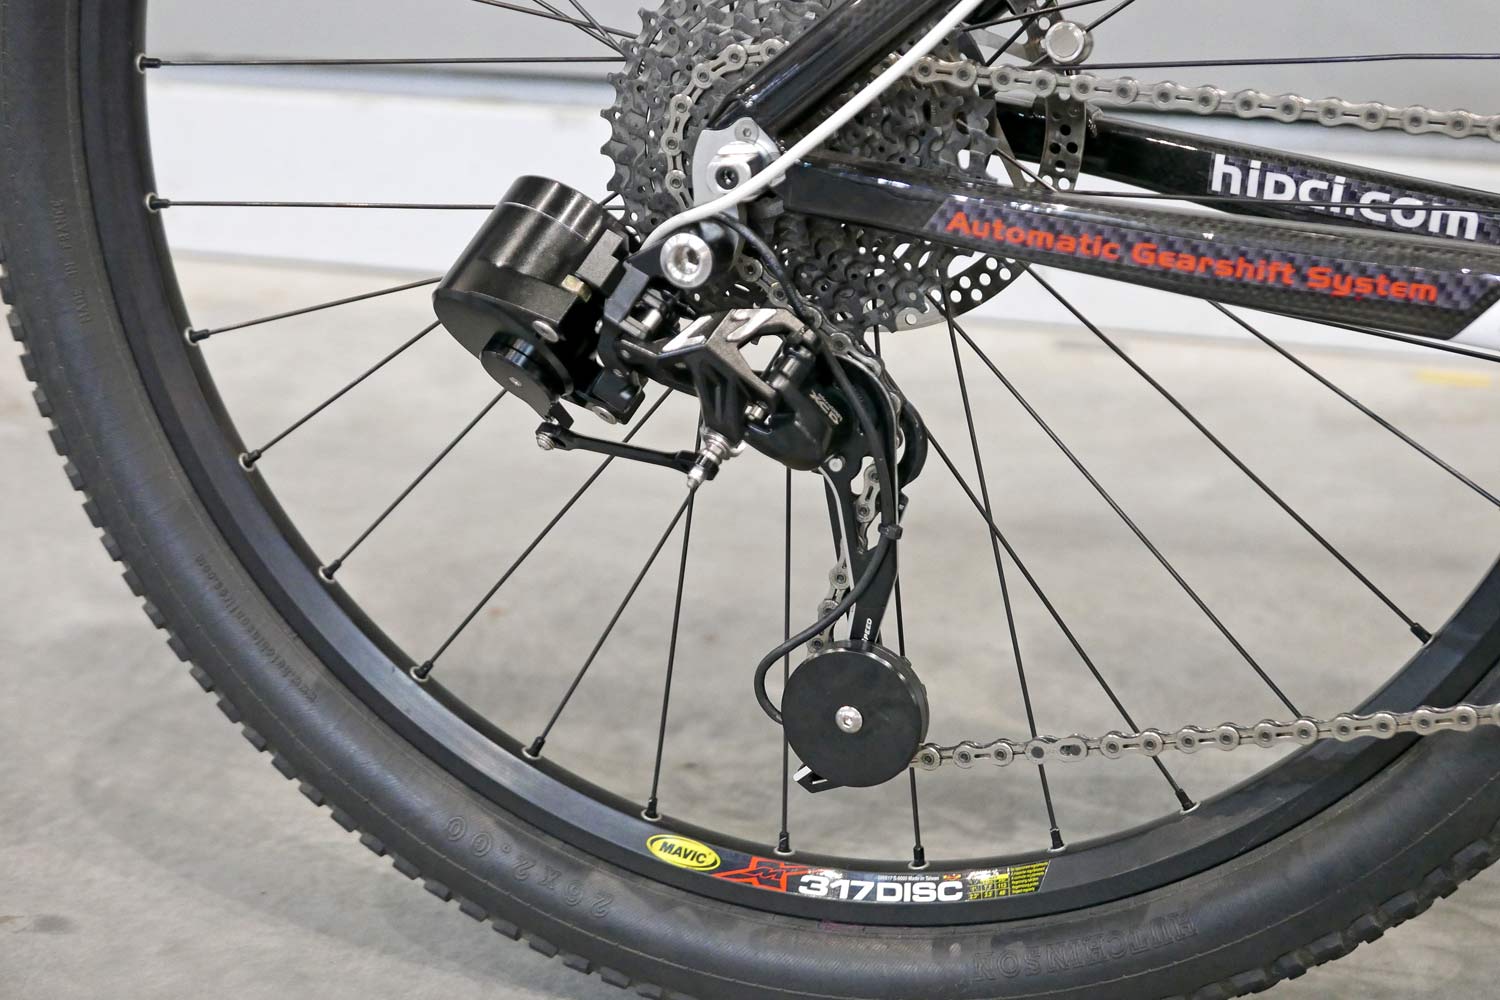 Automatic Gearshift System smart derailleur delivers auto 1x shifts